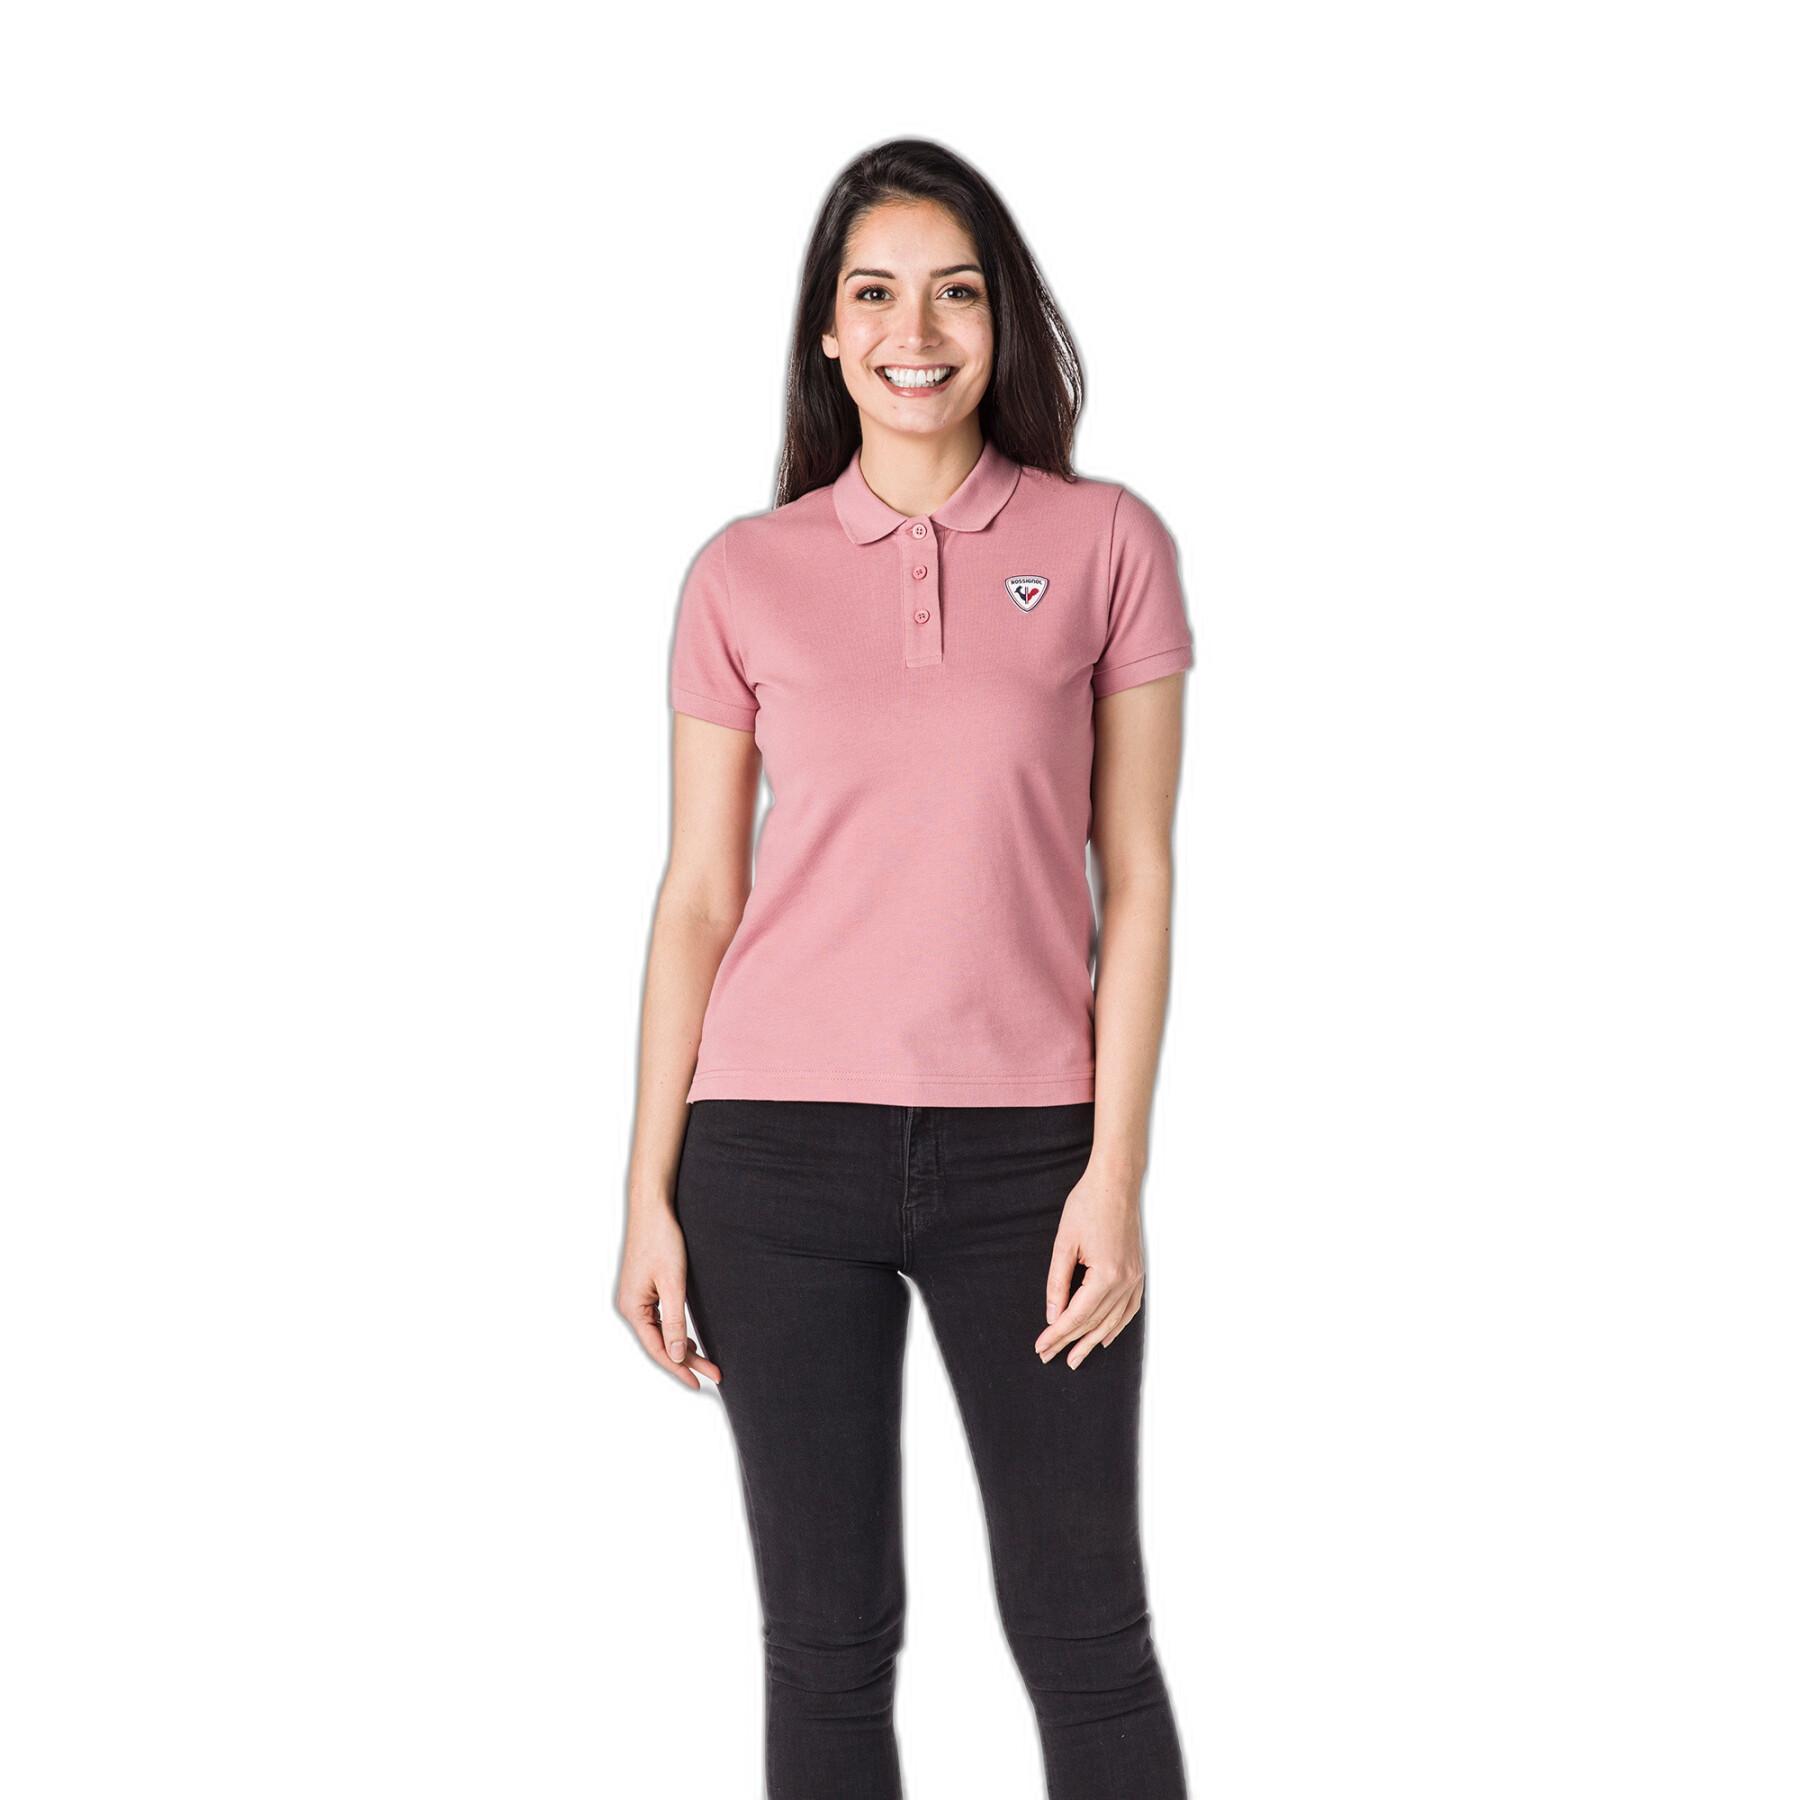 Polo shirt with woman logo Rossignol